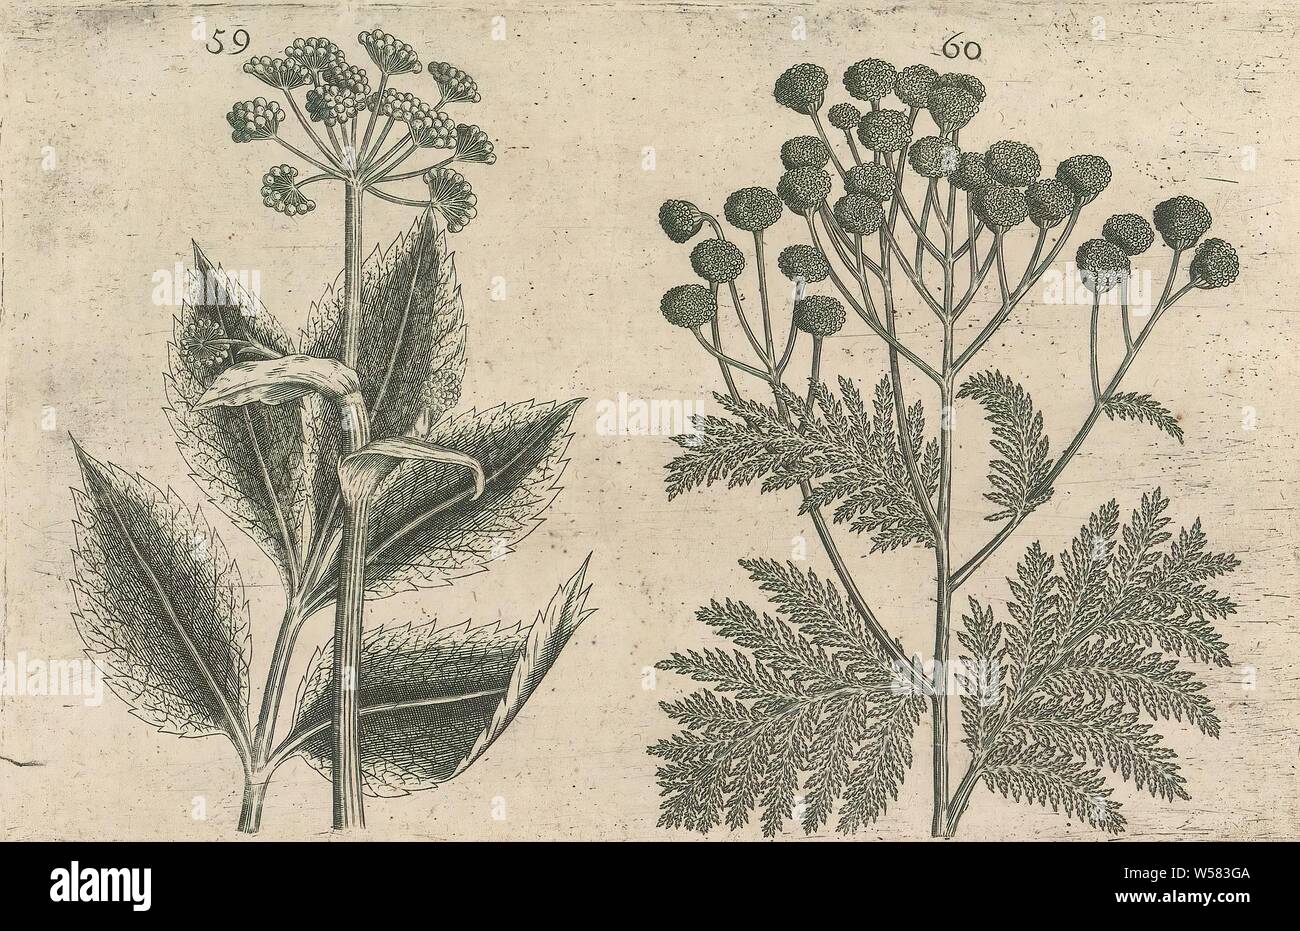 Hart root (Seseli libanotis) and tansy (Tanacetum vulgare), Hart root and tansy FIGs. 59 and 60 on a sheet hand numbered 30. In: Anselmi Boetii de Boot I.C. Brugensis & Rodolphi II. Imp. Novel. medici a cubiculis Florum, Herbarum, ac fructuum selectiorum icones, & vires pleraeque hactenus ignotæ. Part of the album with sheets and plates from De Boodts herbarium from 1640. The twelfth of twelve albums with watercolors of animals, birds and plants known around 1600, commissioned by Emperor Rudolf II, anonymous, 1604 - 1632 and/or 1640, paper, ink, watercolor (paint), engraving, h 135 mm × w Stock Photo